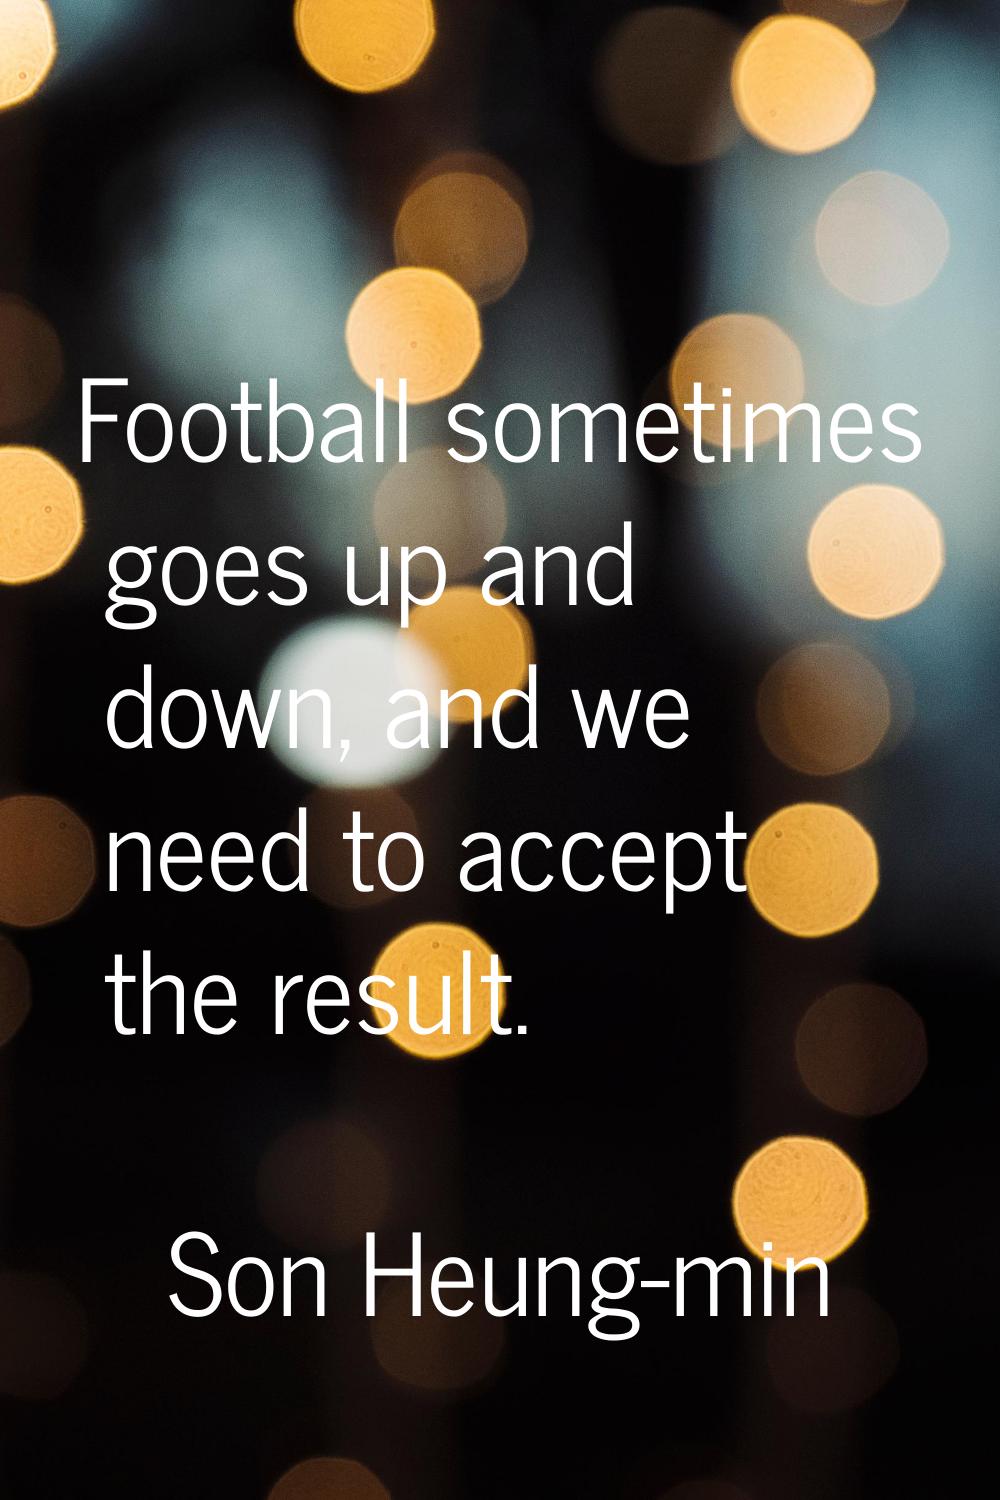 Football sometimes goes up and down, and we need to accept the result.